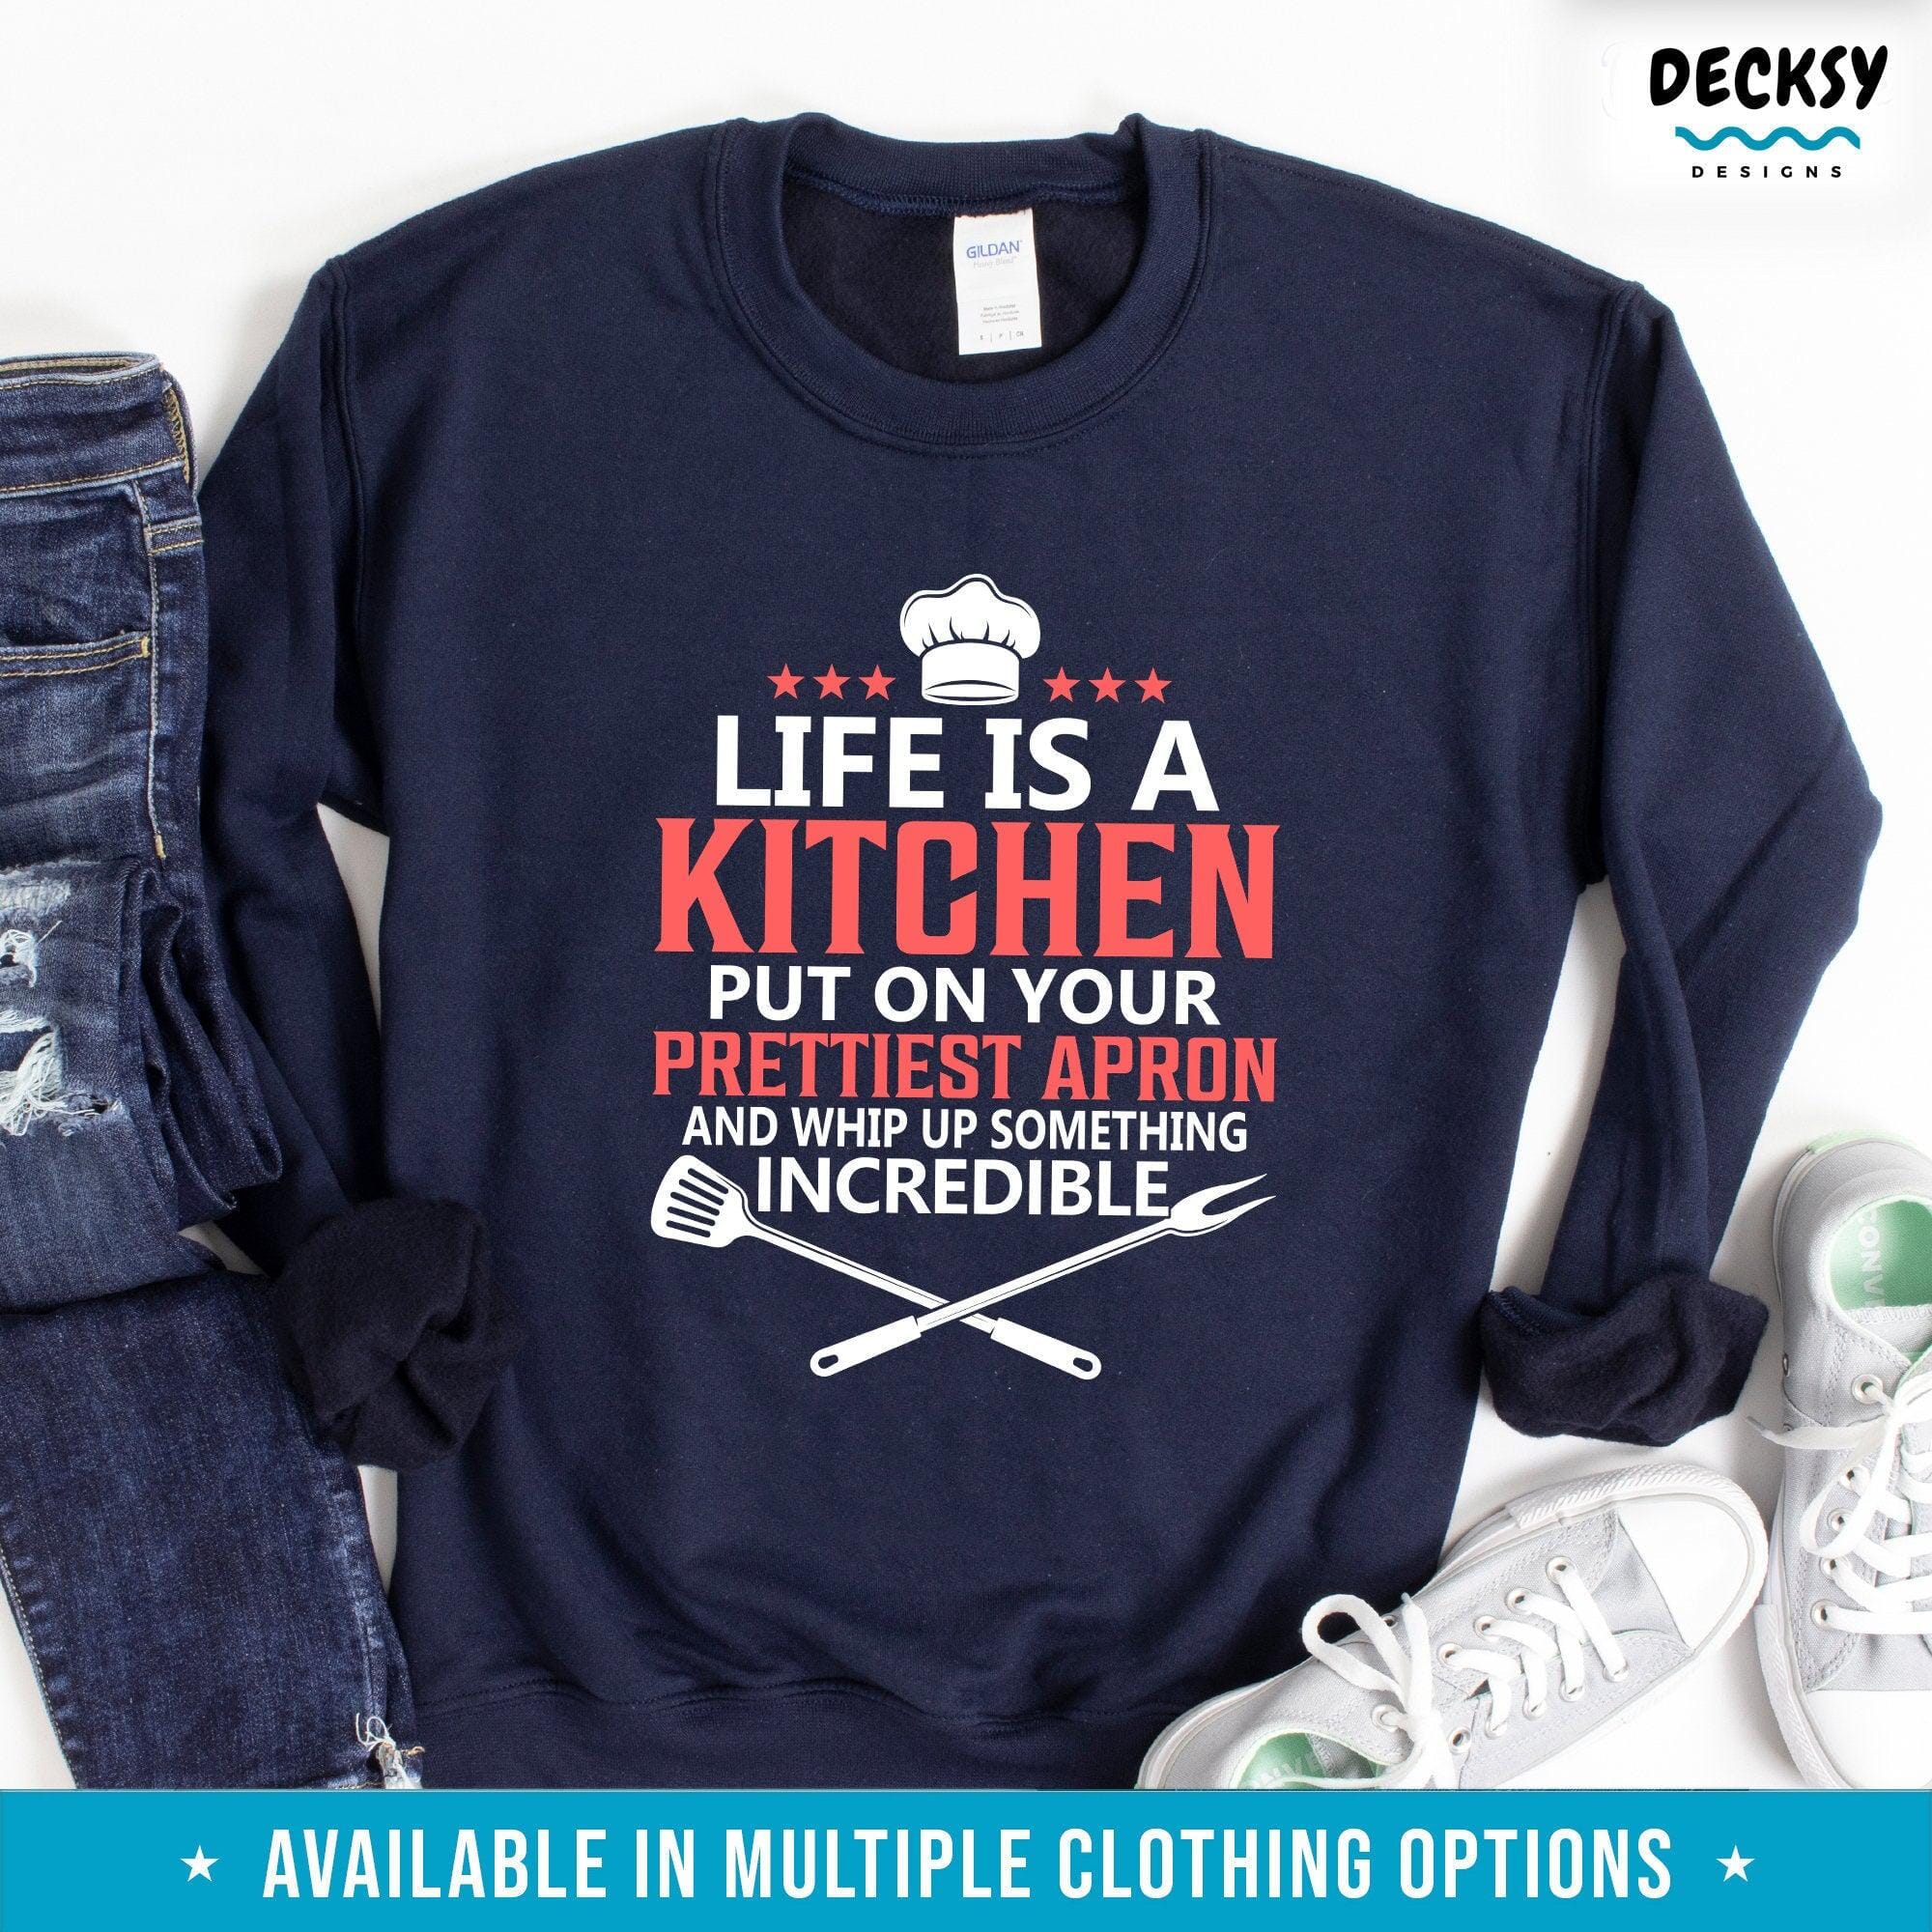 Cooking T-Shirt, Gift For Chef Baker-Clothing:Gender-Neutral Adult Clothing:Tops & Tees:T-shirts:Graphic Tees-DecksyDesigns